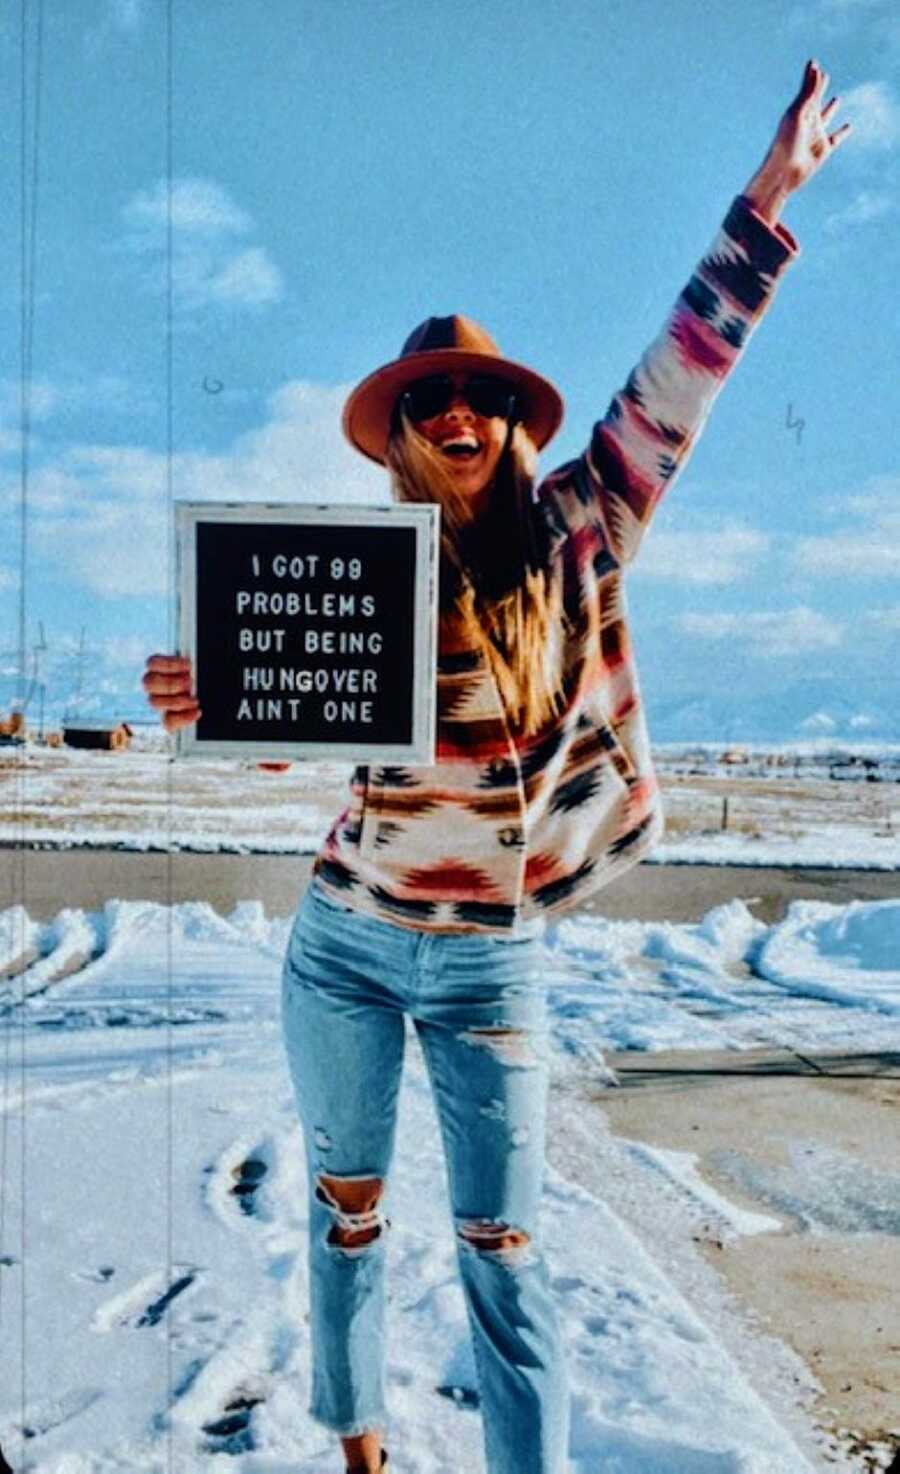 Woman celebrates her sobriety journey with a sign that reads "I got 99 problems but being hungover ain't one"